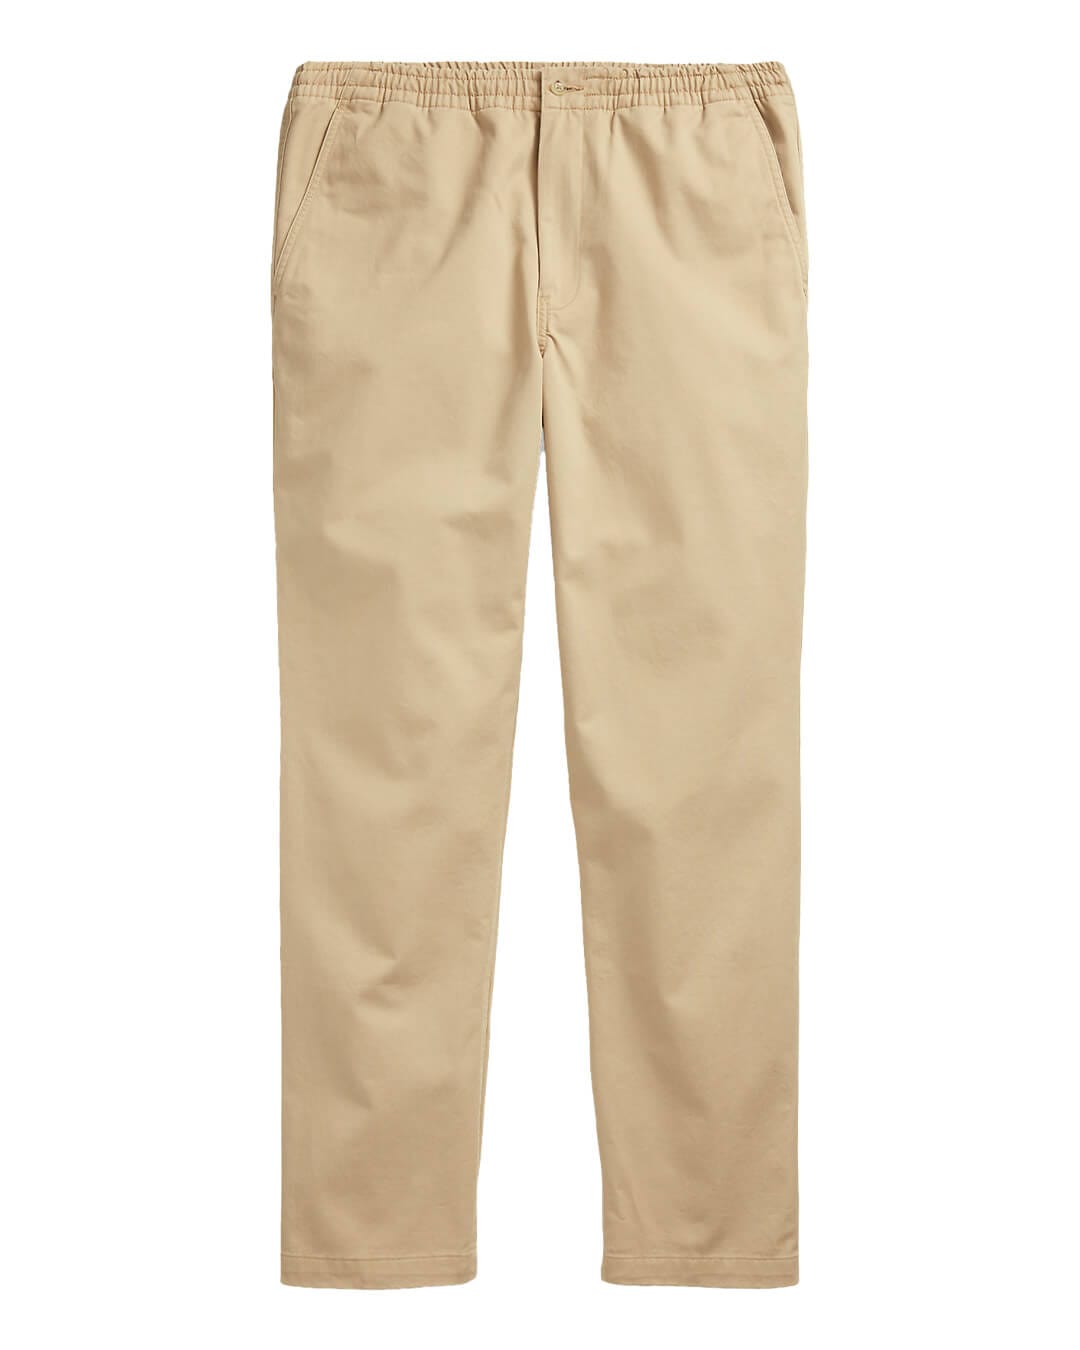 Polo Ralph Lauren Trousers Polo Ralph Lauren Prepster Classic Fit Beige Chino Trouser